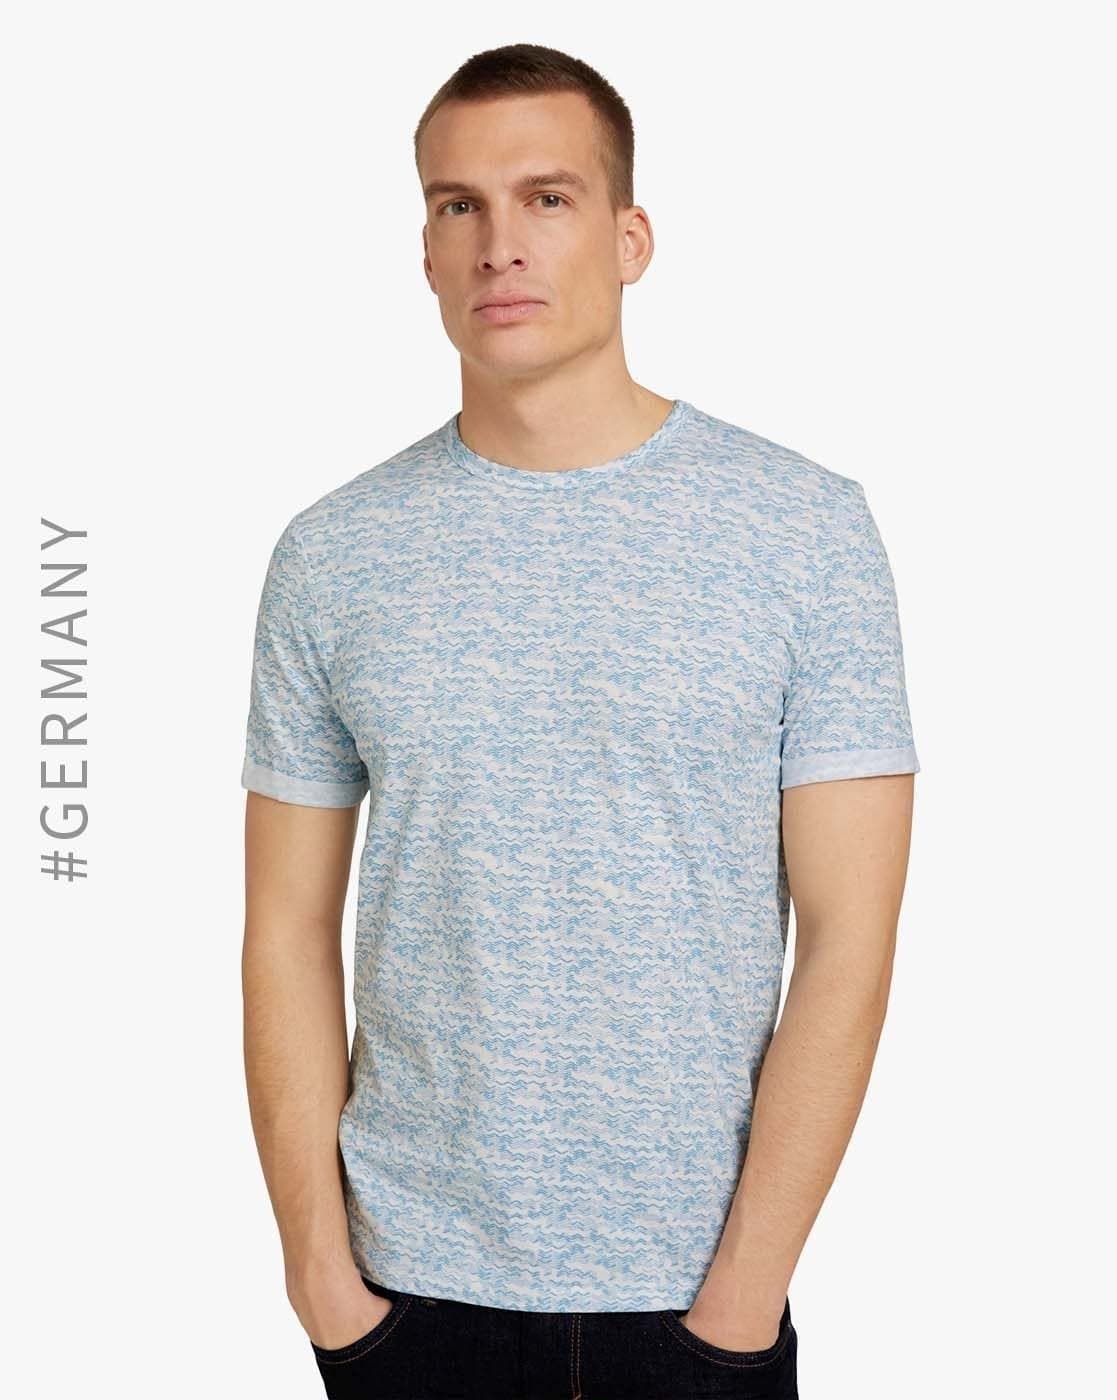 Buy Blue Tshirts for by Men Online Tailor Tom